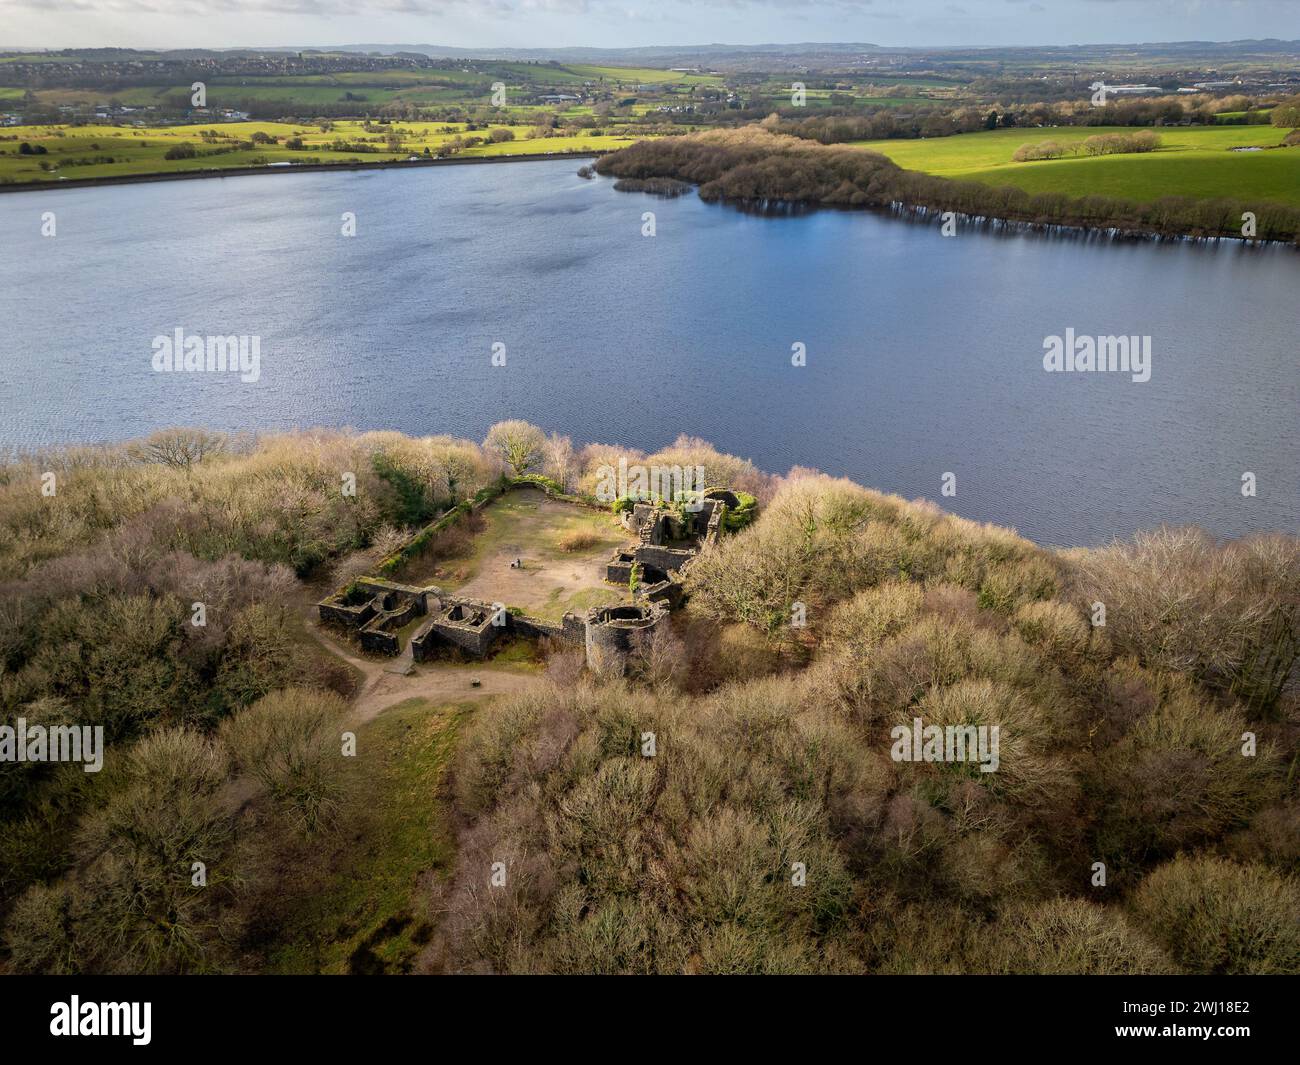 Bolton, England, UK, Monday February 12, 2024. Drone images of early spring sunshine illuminating Liverpool Caste on the shores of Rivington Reservoir, Horwich, Bolton. The castle was commisioned in 1912 by William Hesketh Lever, a philanthropist and founder of Lever Brothers, now UniLever. It was a folly and never intended to be completed and is based on the original on the shores of the Mersey in Liverpool. Credit: Paul Heyes/Alamy News Live. Stock Photo